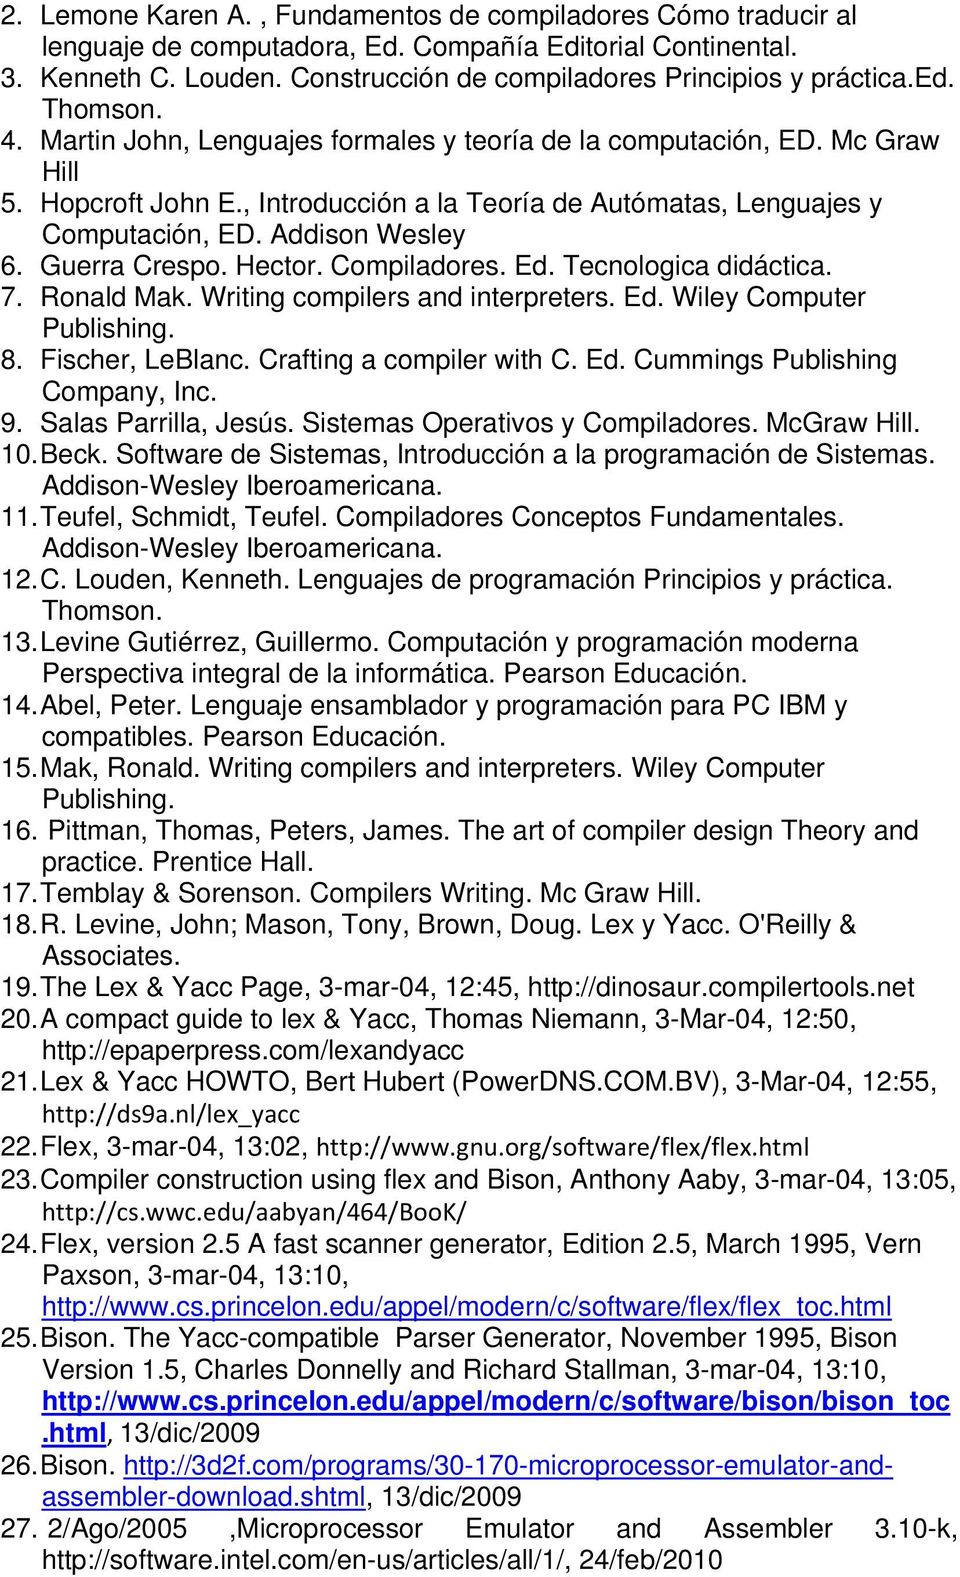 Guerra Crespo. Hector. Compiladores. Ed. Tecnologica didáctica. 7. Ronald Mak. Writing compilers and interpreters. Ed. Wiley Computer Publishing. 8. Fischer, LeBlanc. Crafting a compiler with C. Ed. Cummings Publishing Company, Inc.